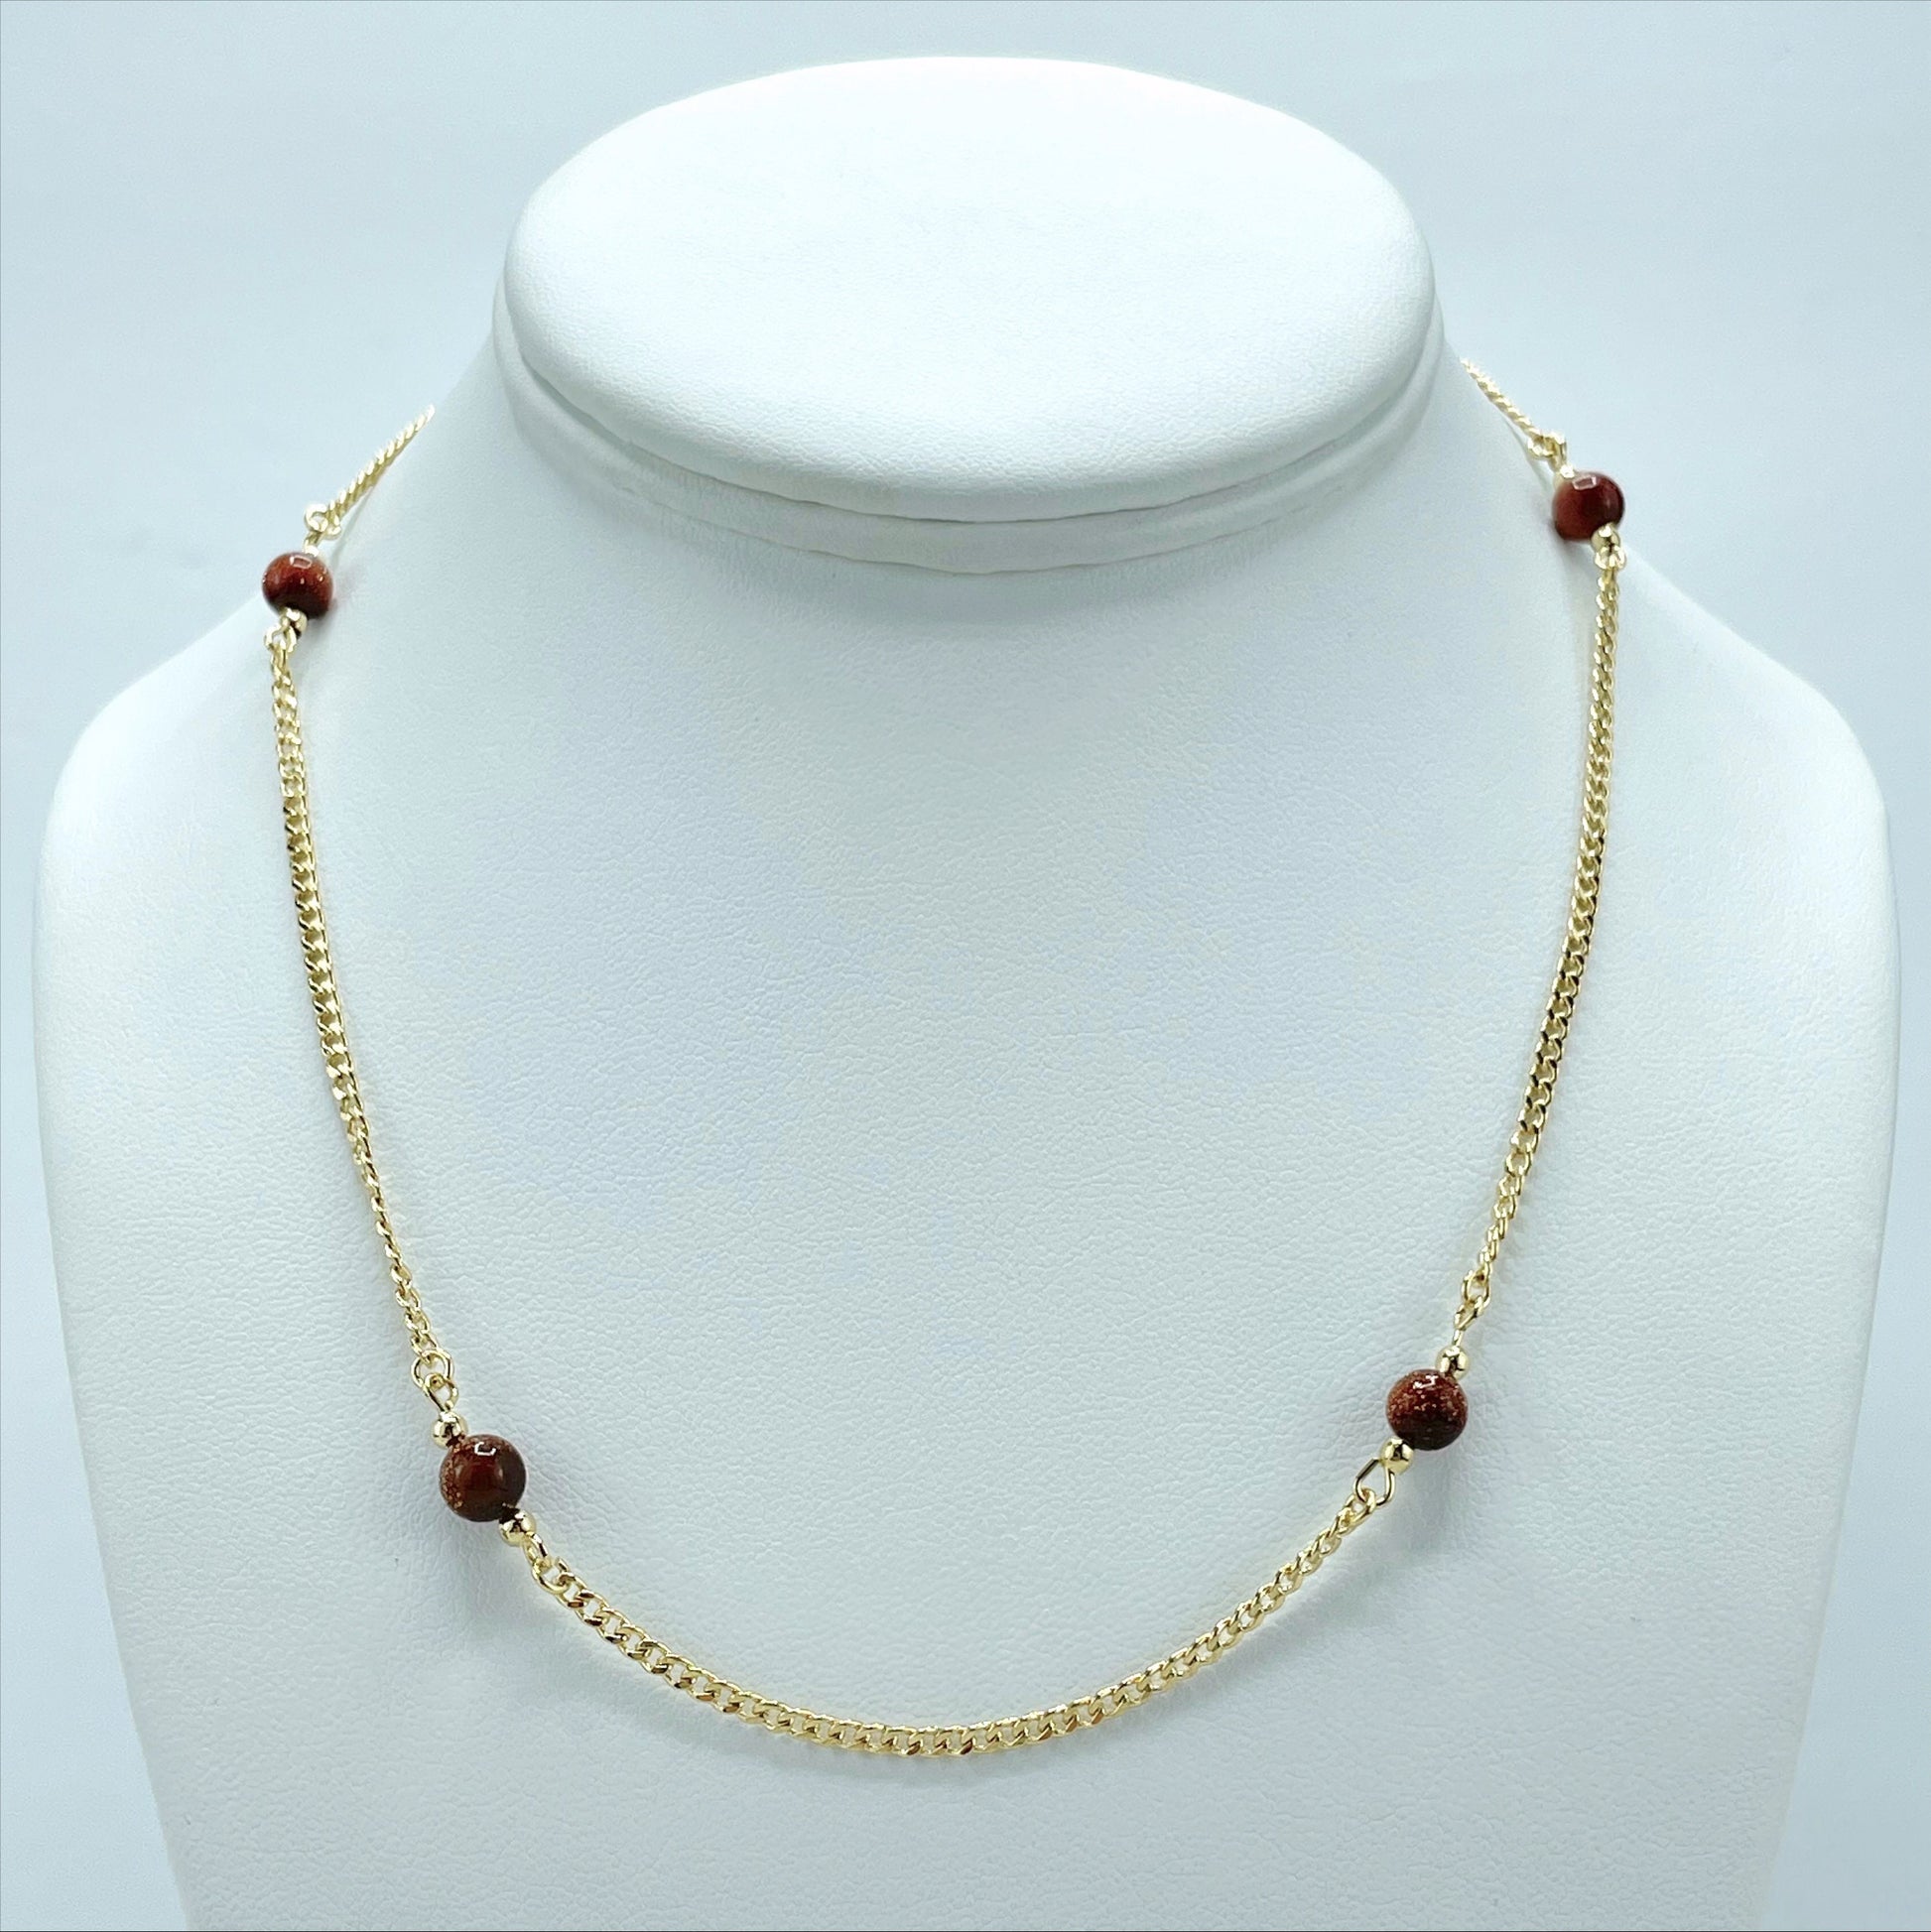 18k Gold Filled Brown Aventurine Bead Necklace Curb Link Chain Wholesale Jewelry Making Supplies